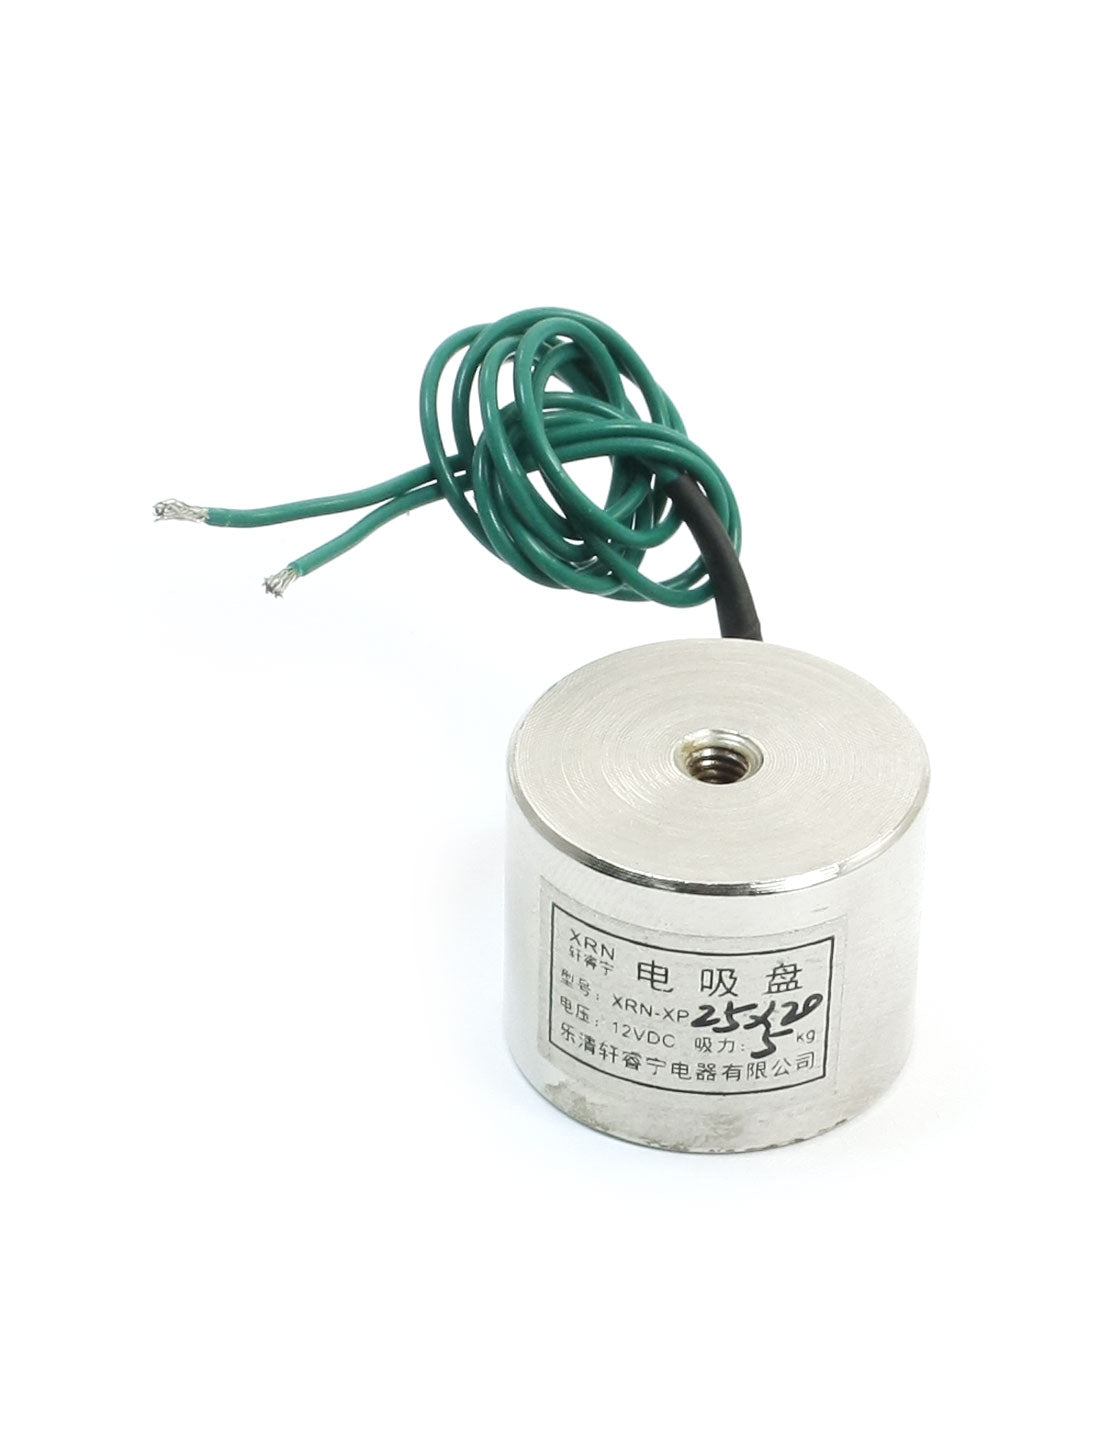 uxcell Uxcell 5Kg/11Lb 4mm Thread Dia Lifting Magnet Electromagnet Solenoid DC12V